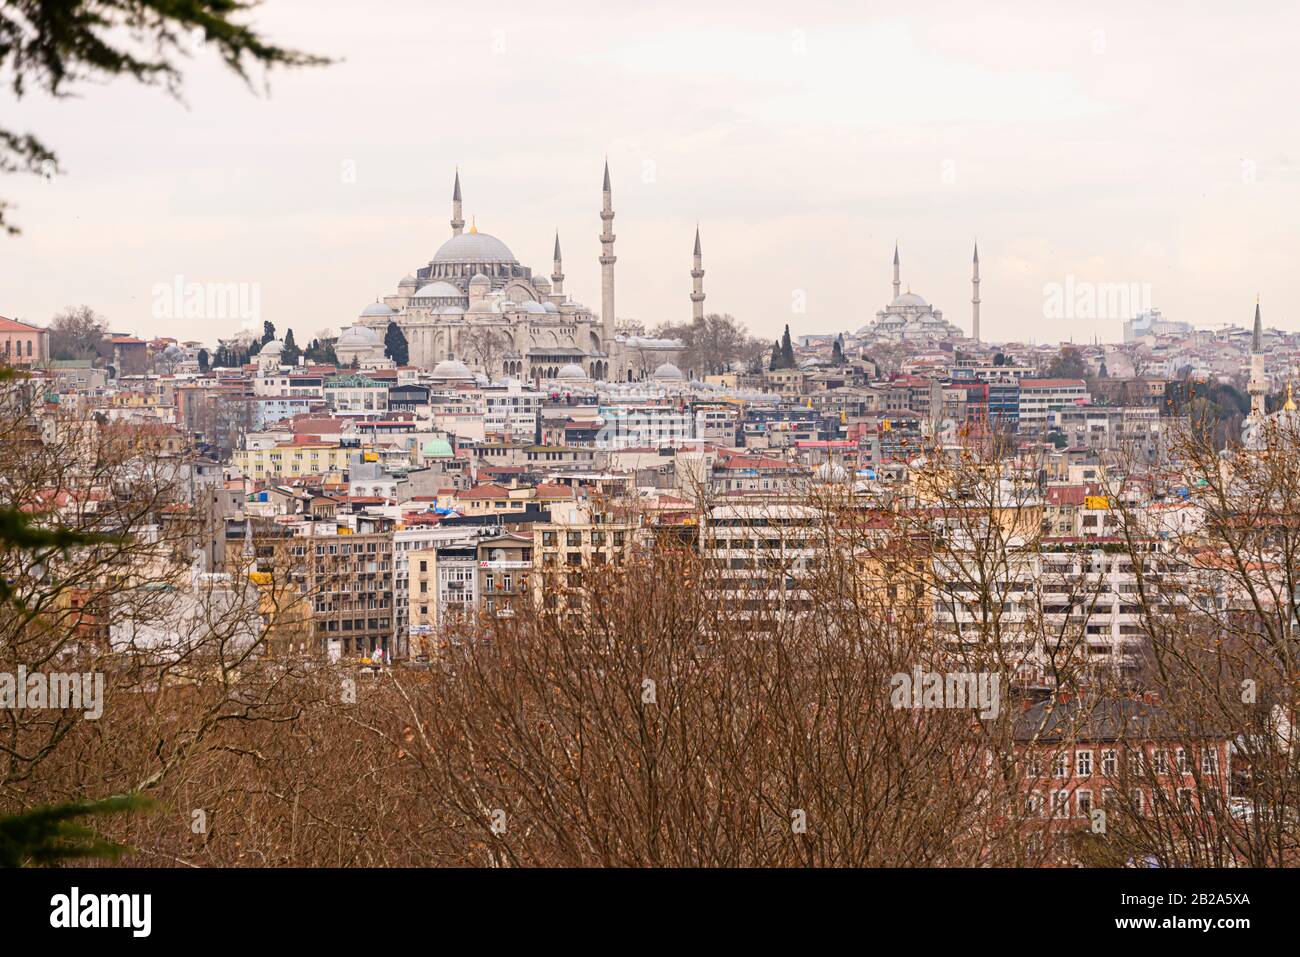 Cityscape of mosques, minaretes and other buildings, Istanbul, Turkey Stock Photo